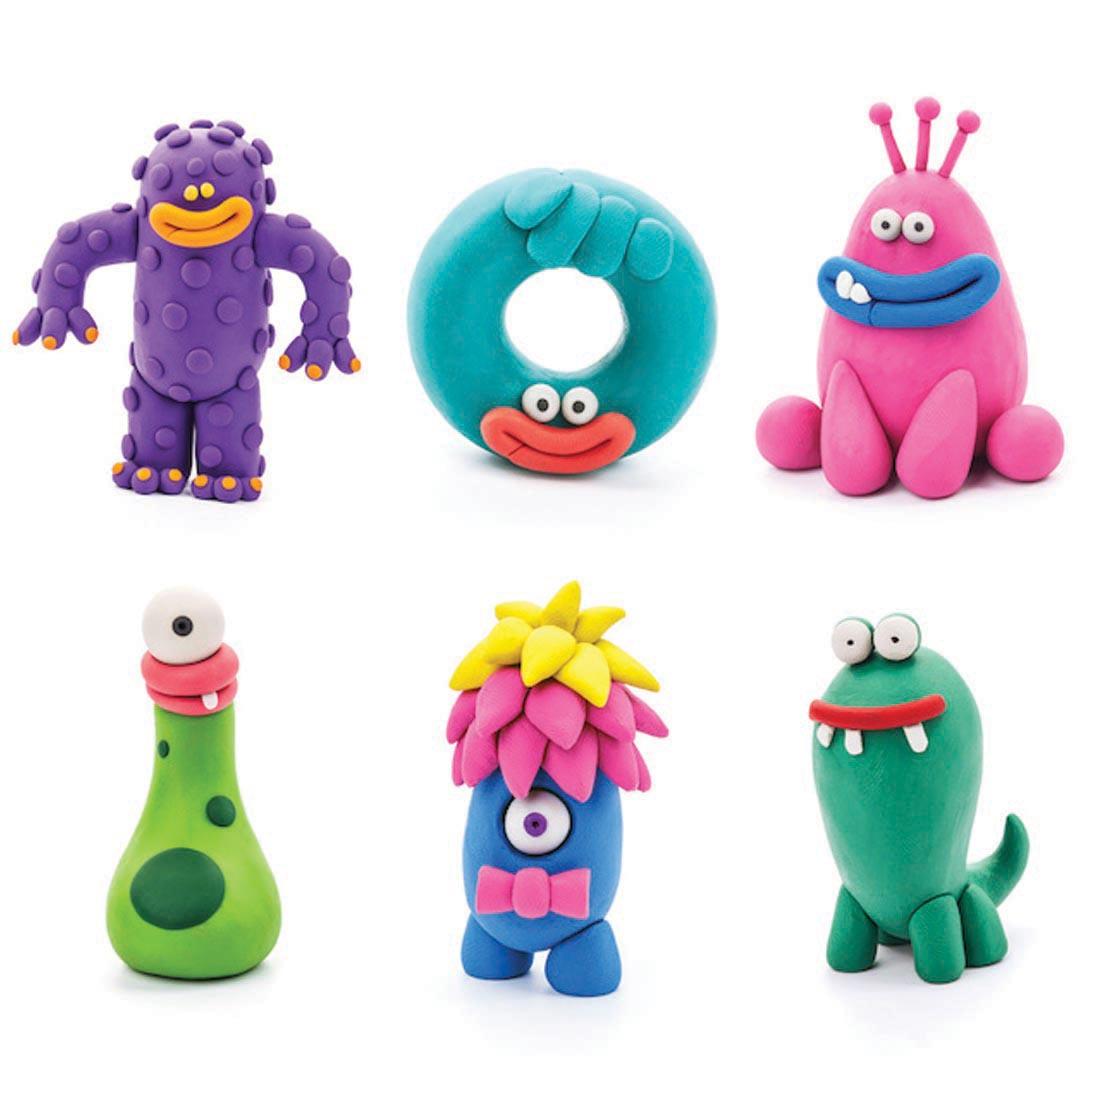 examples of monsters made with hey clay modeling kit